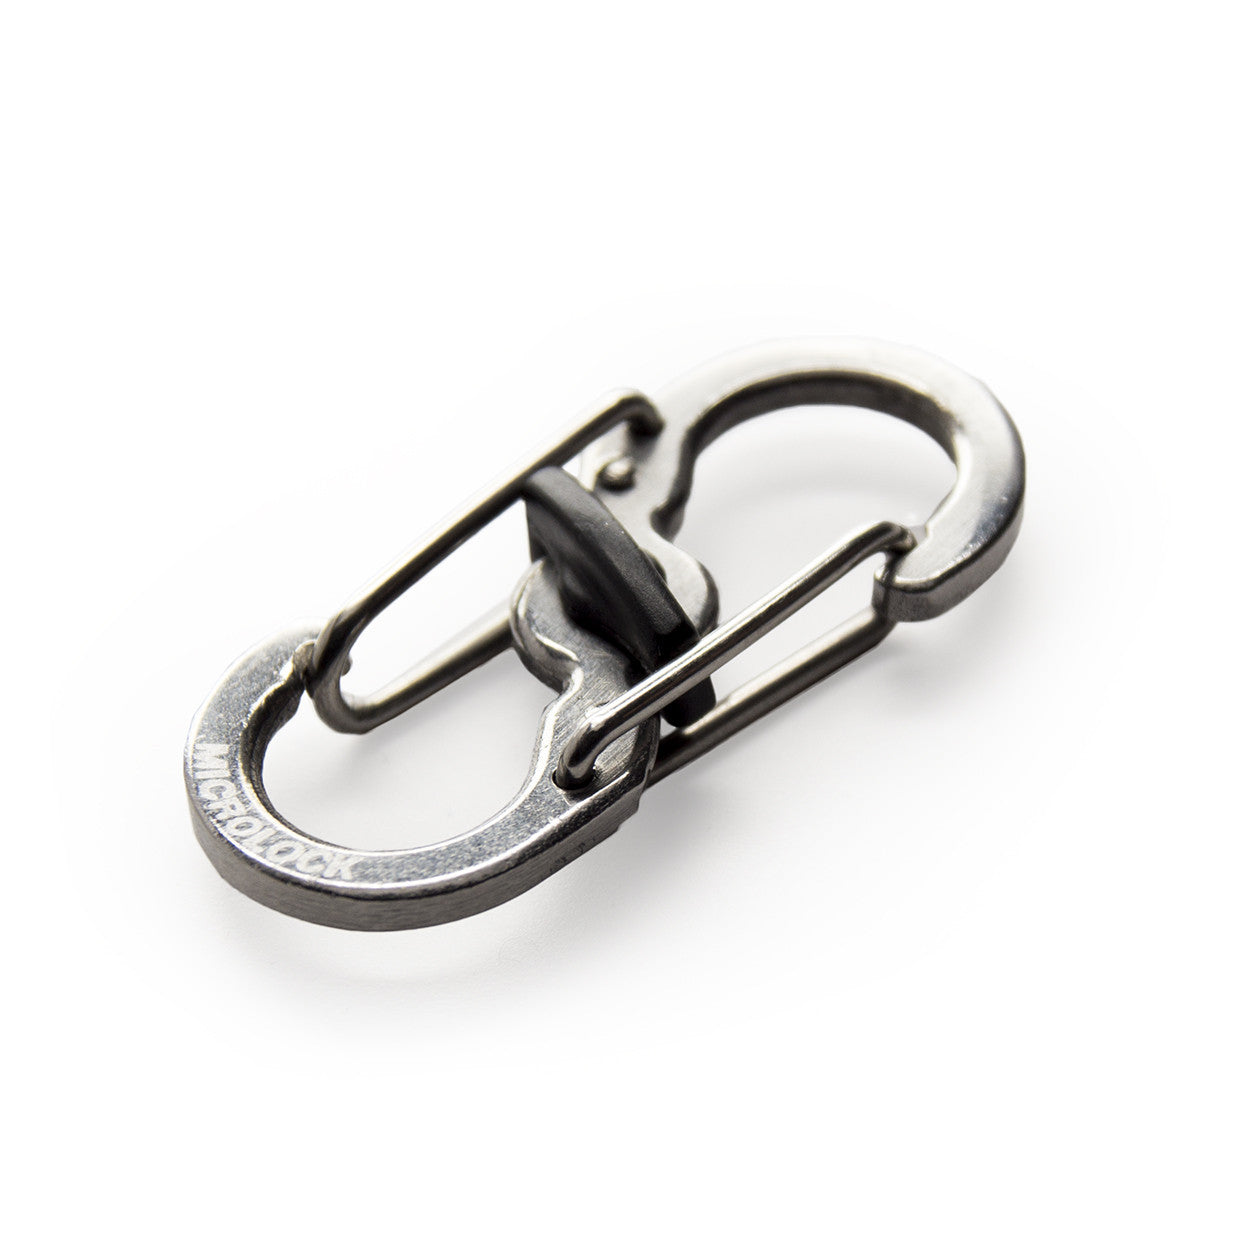 KeySmart KeyConnect Mini Carabiner Clip with Swivel Clasp Lobster